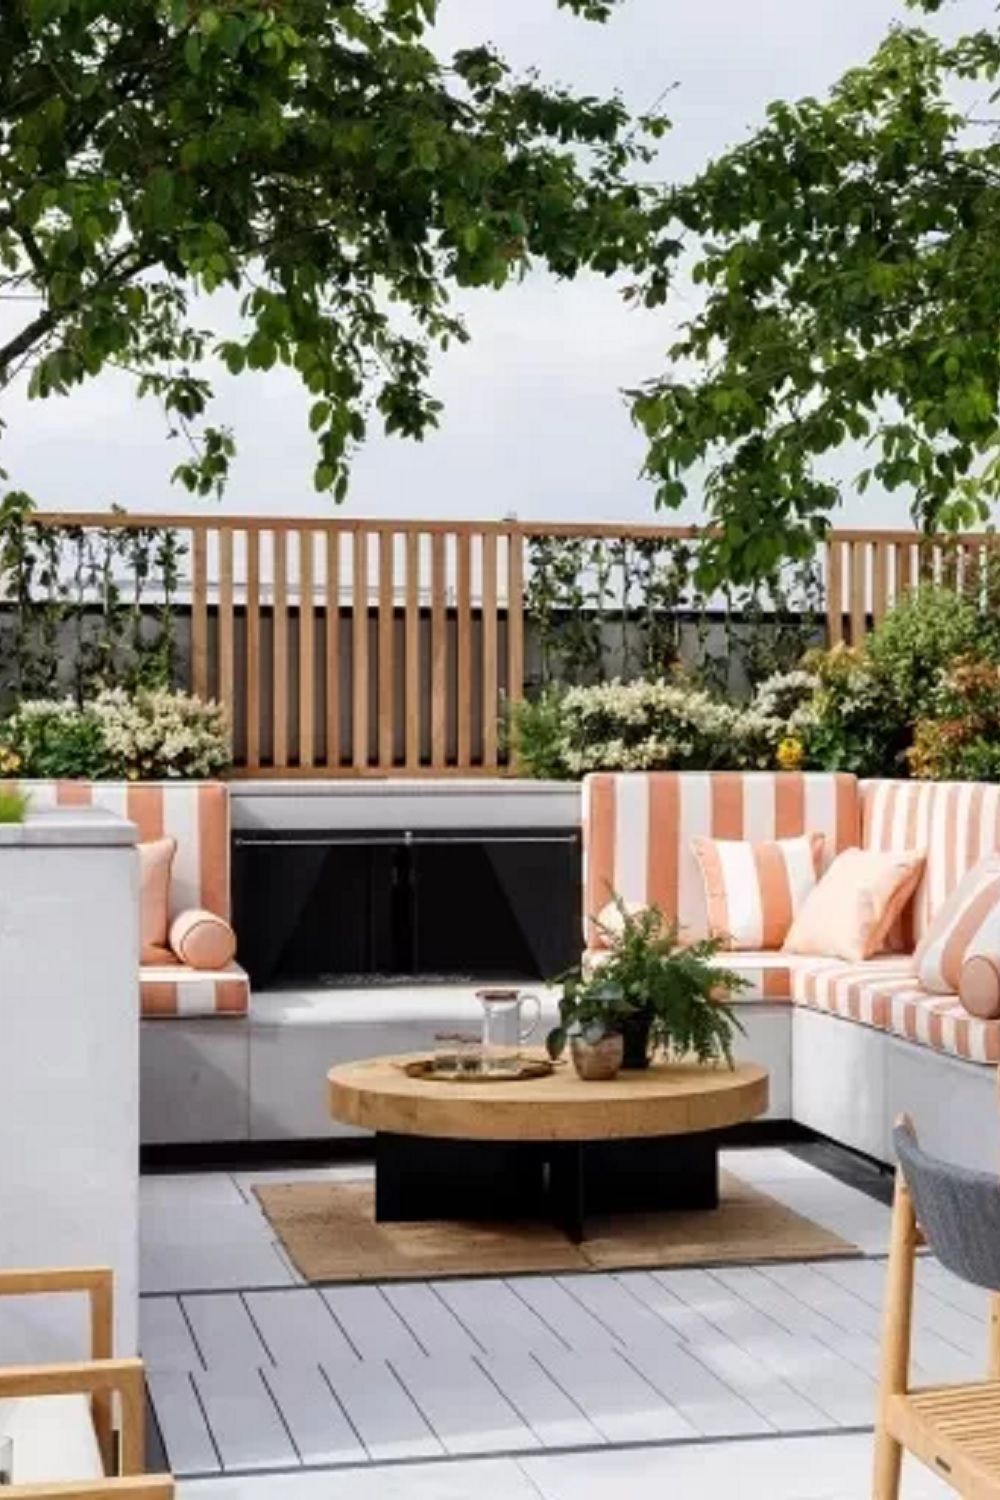 The Benefits of Investing in High-Quality
Patio Furniture Cushions